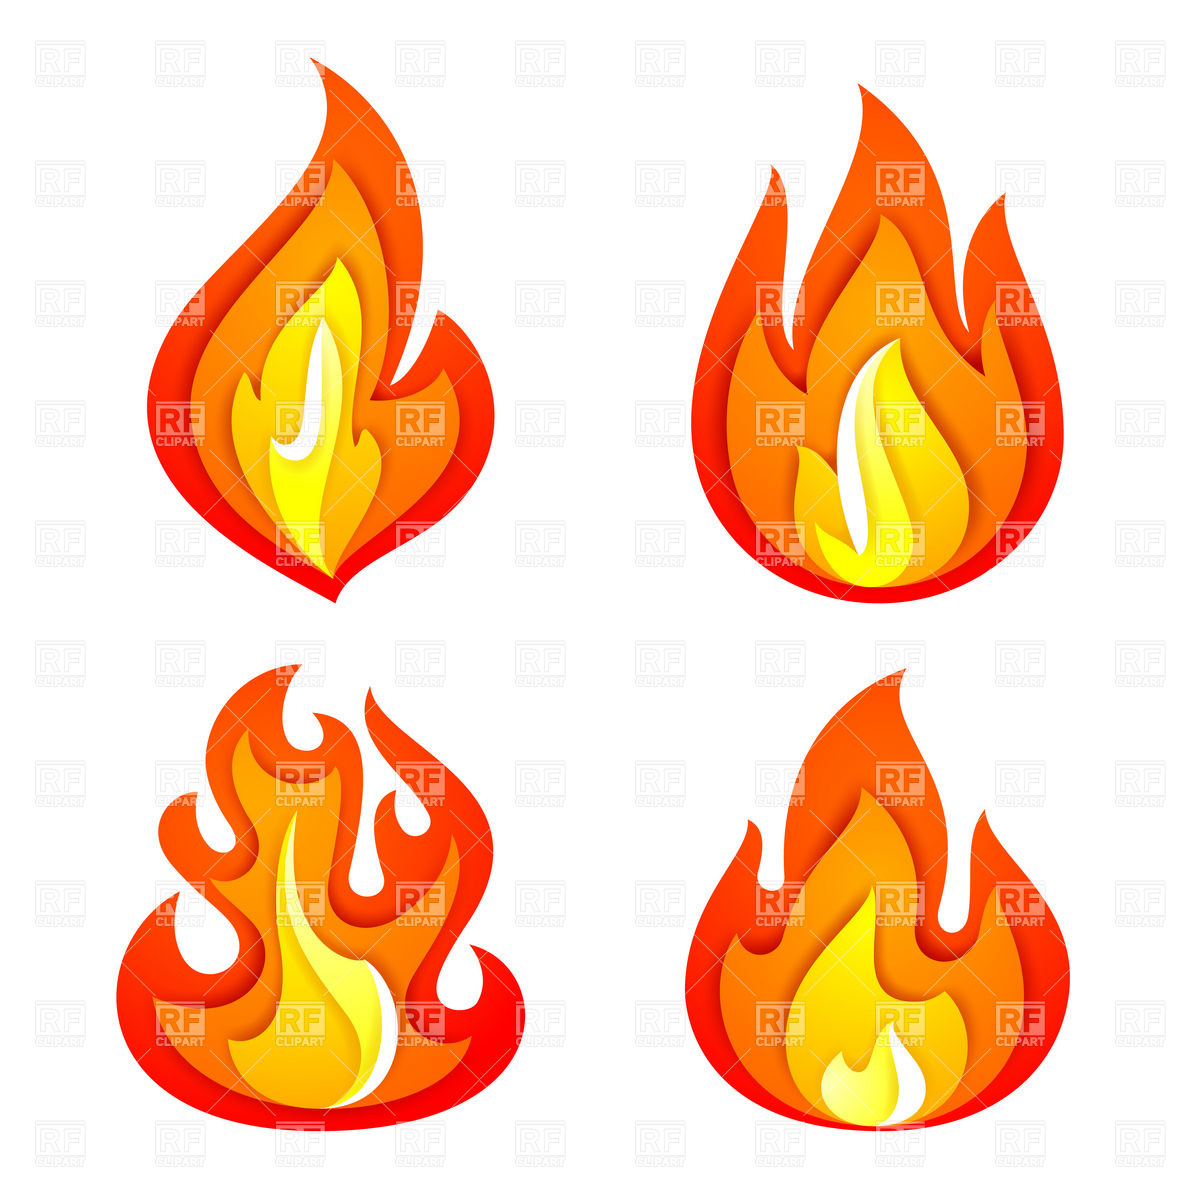 black and white fire clipart